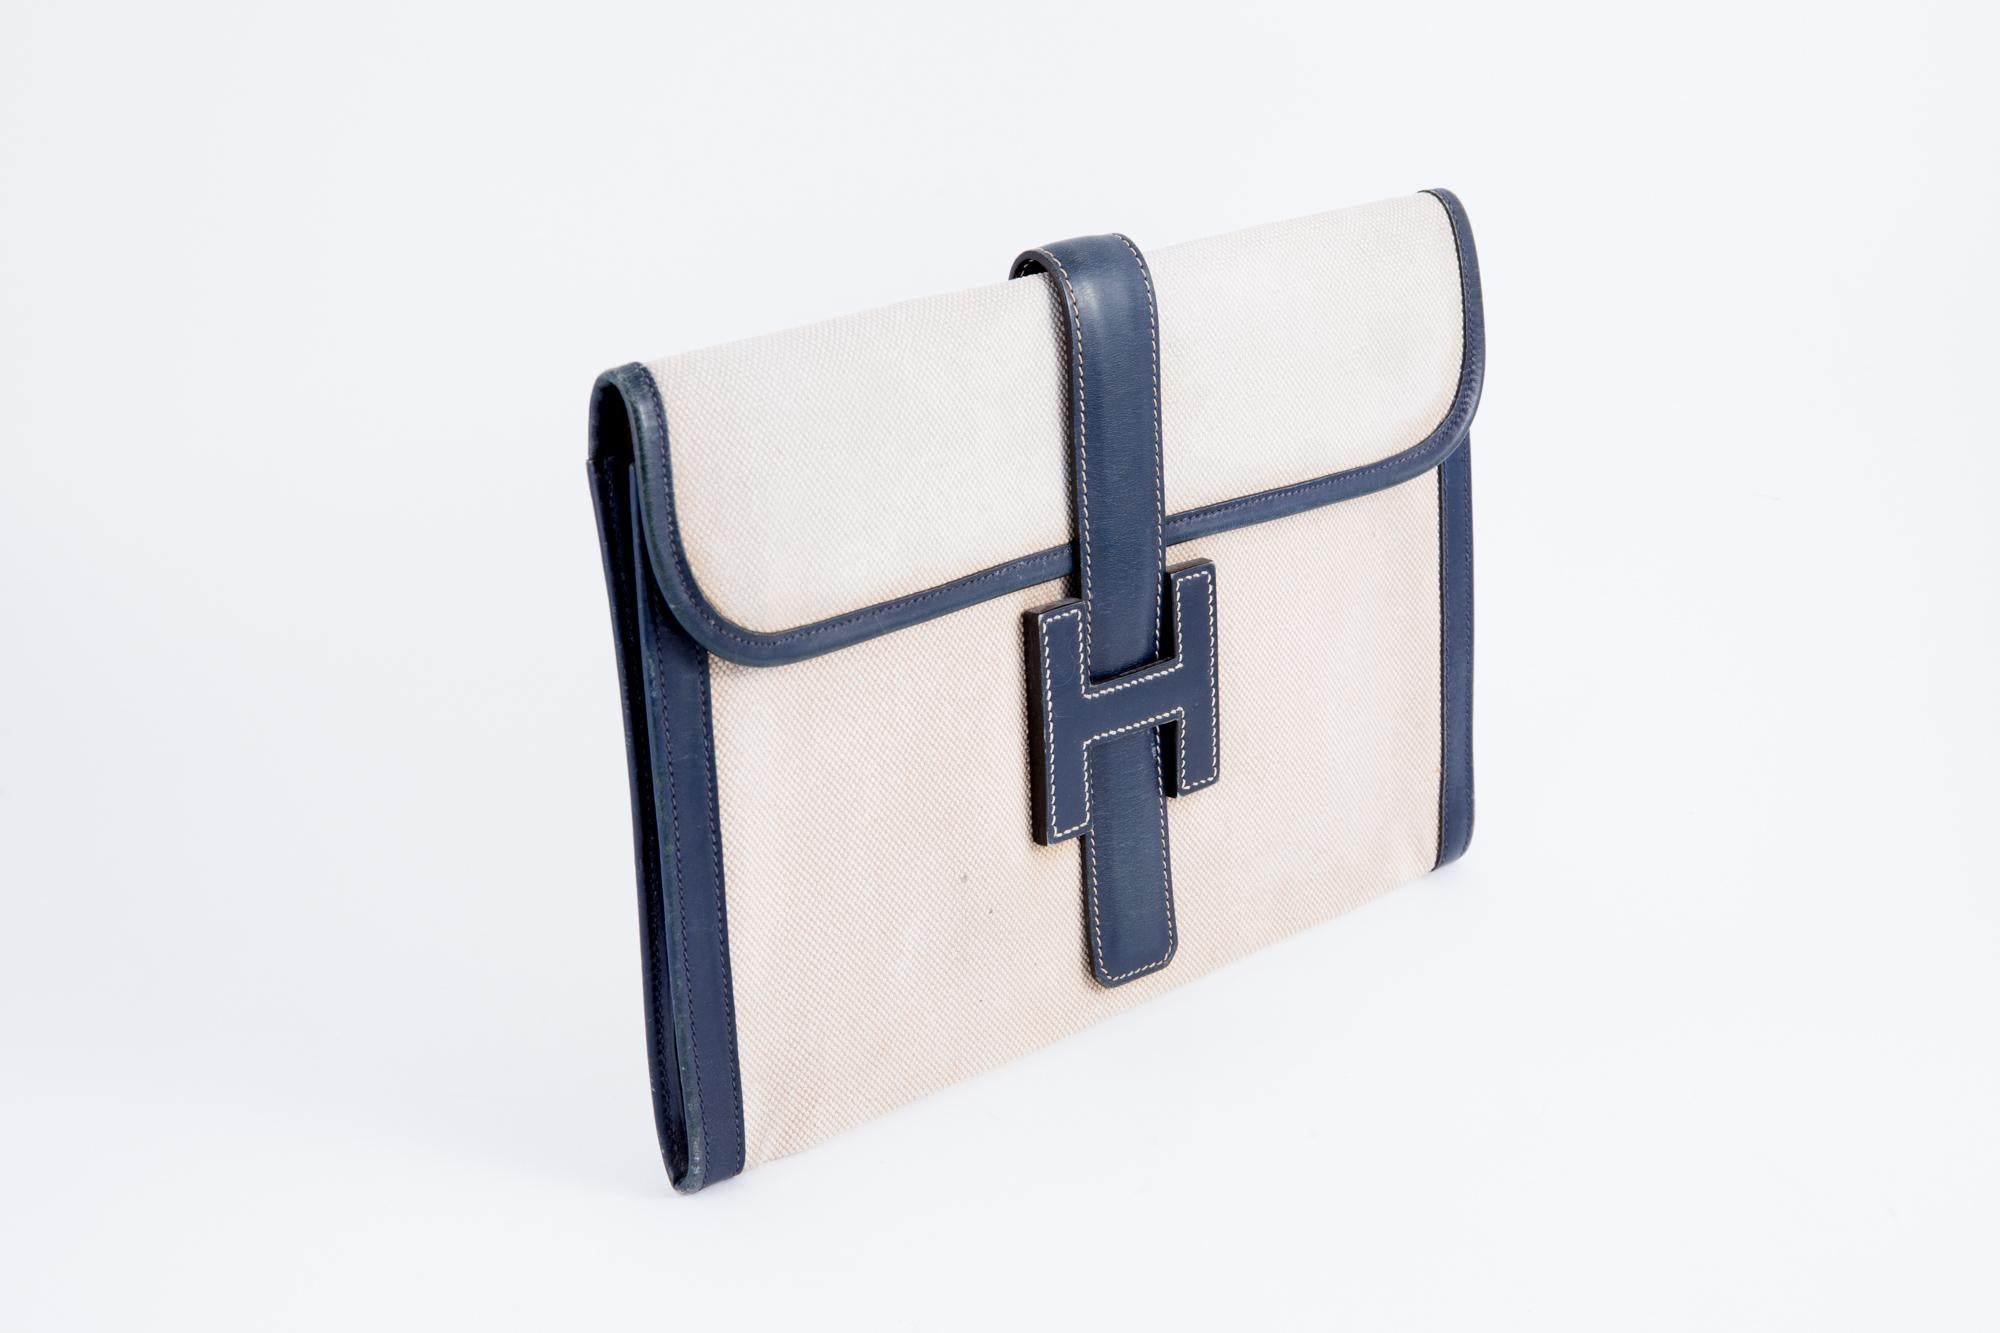 Hermes Jigé ivory canvas and navy box leather clutch featuring a foldover top, a strap closure, a front logo patch, a cotton canvas lining, a center front Hermes Paris stamp. 
In good vintage condition. Made in France.
Width:11.4in. (29cm)
Height: